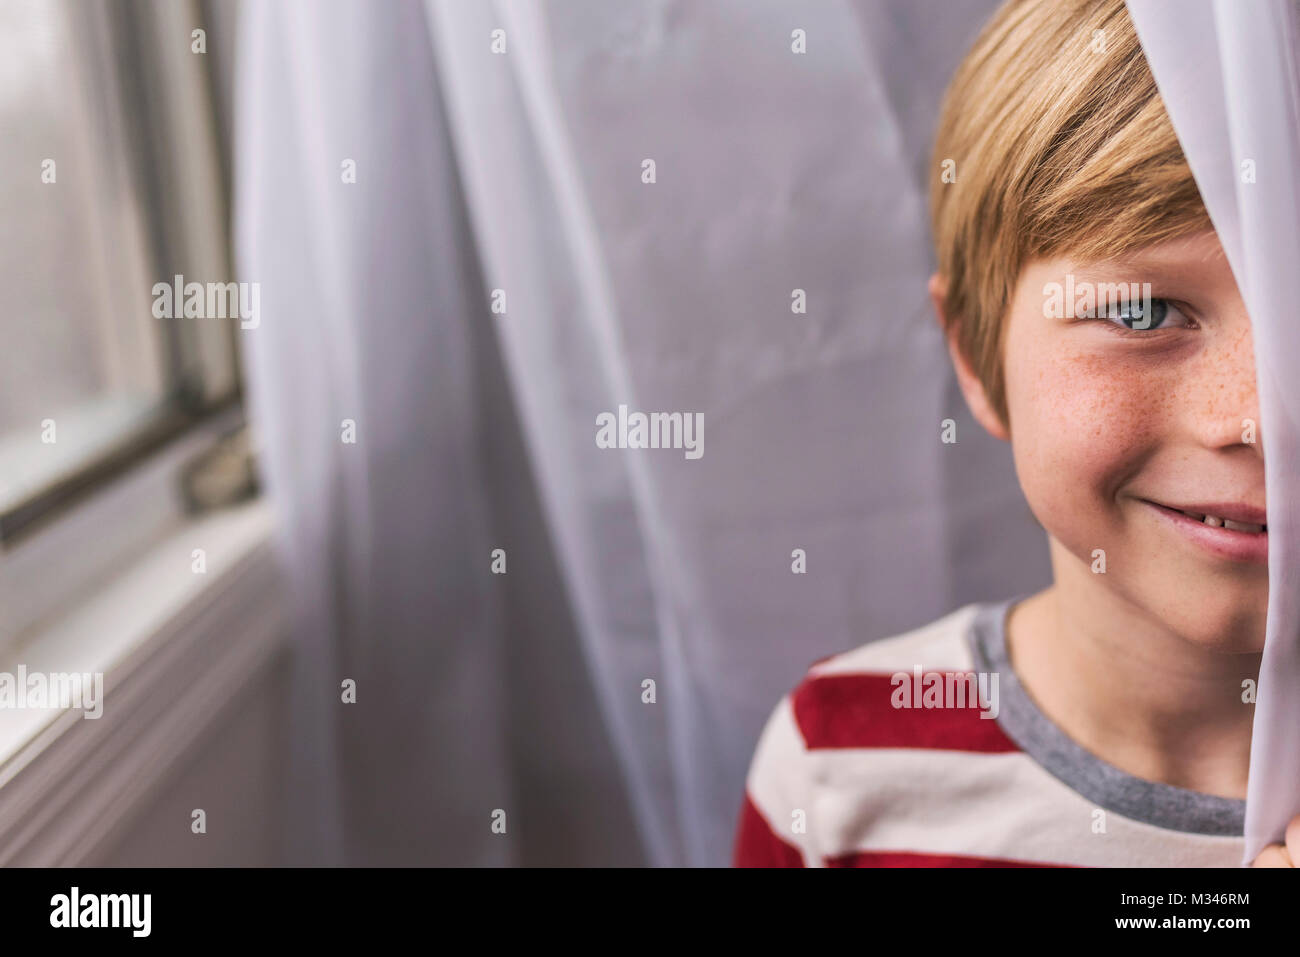 Portrait of a smiling boy with freckles standing by a window hiding behind a curtain Stock Photo